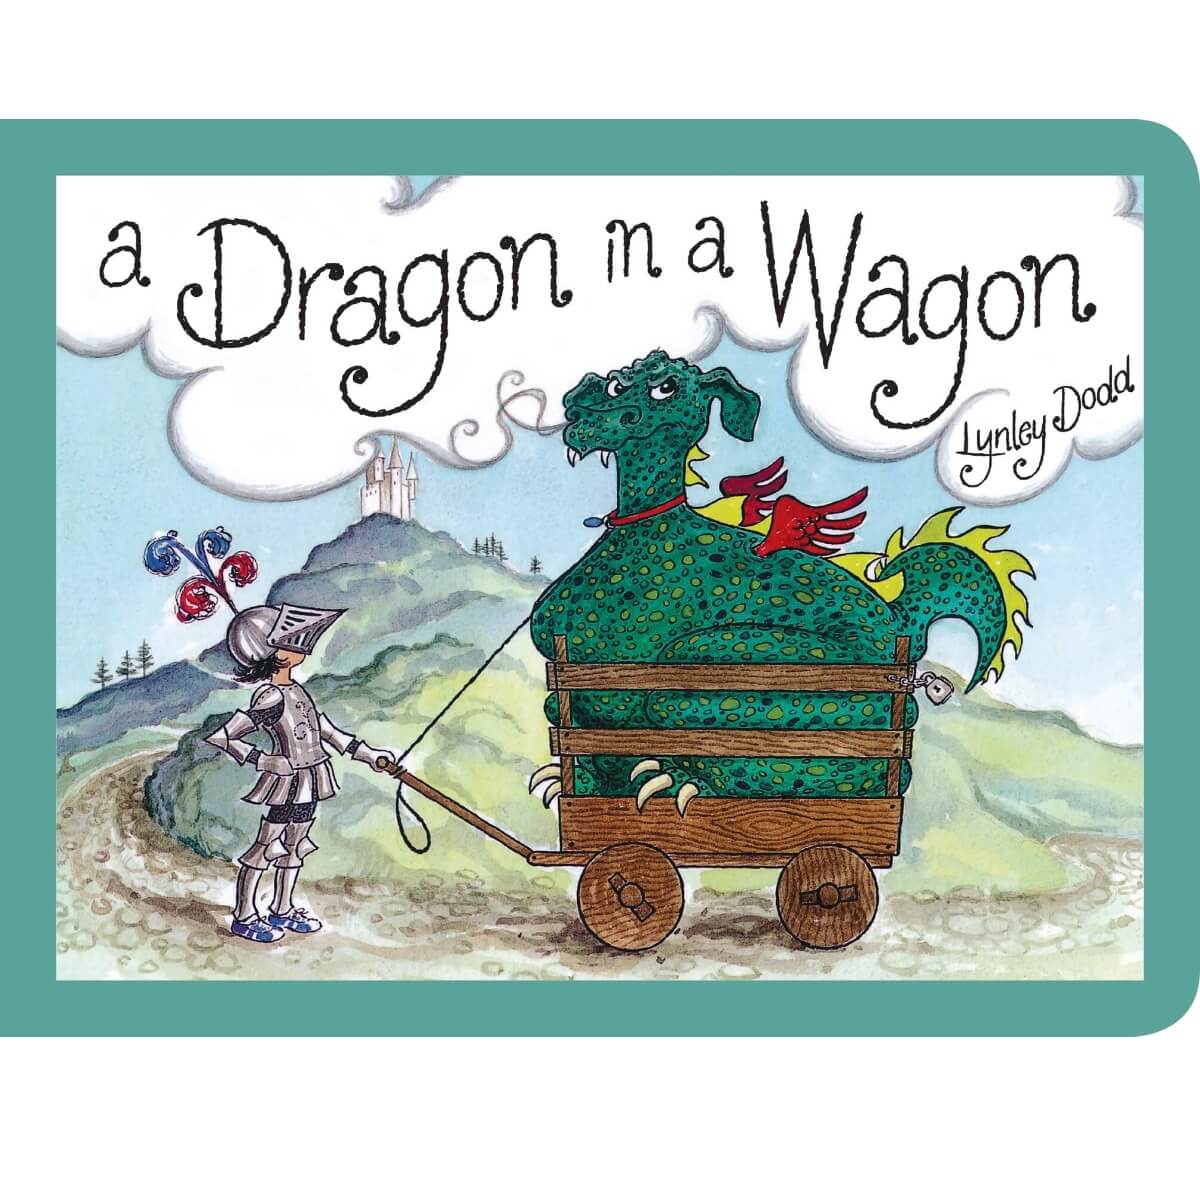 A Dragon in a Wagon by Lynley Dodd available at Bear & Moo